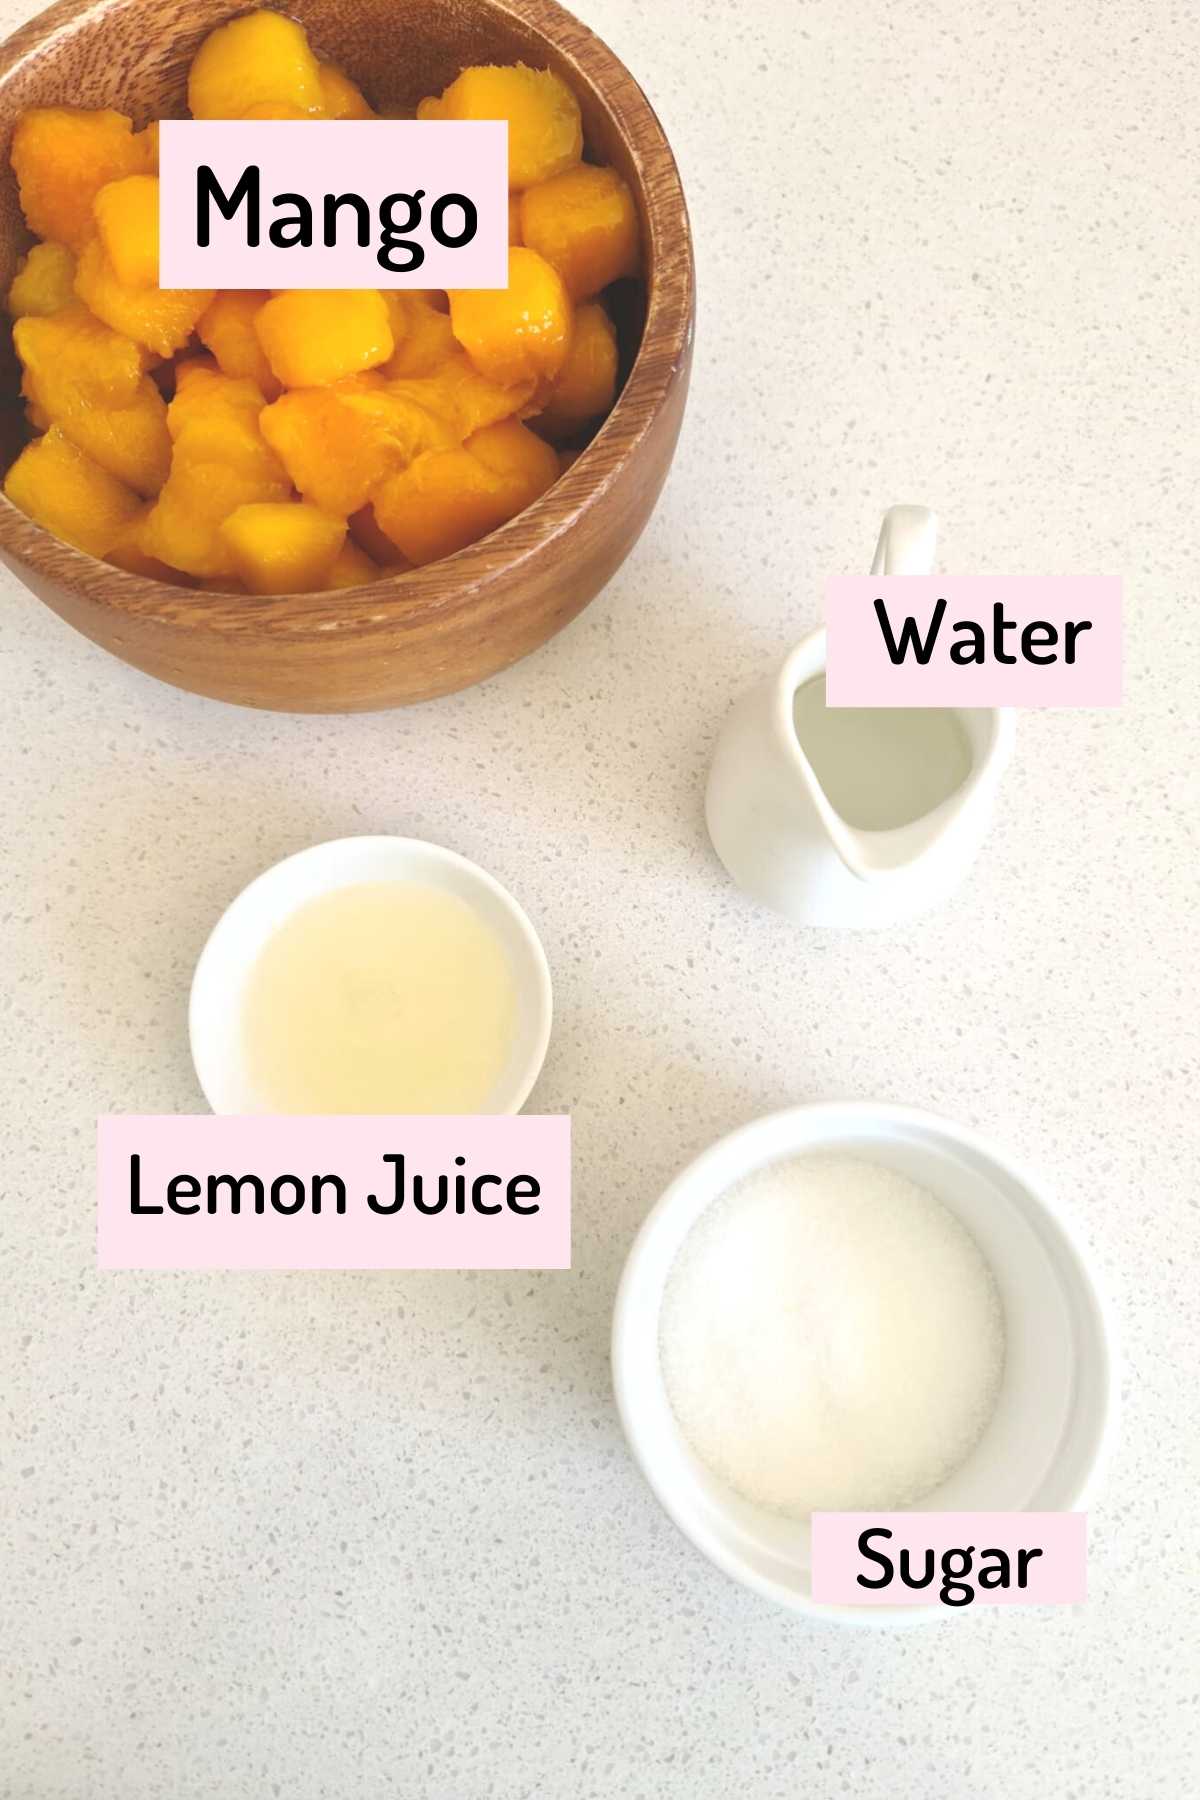 ingredients needed to make popsicles